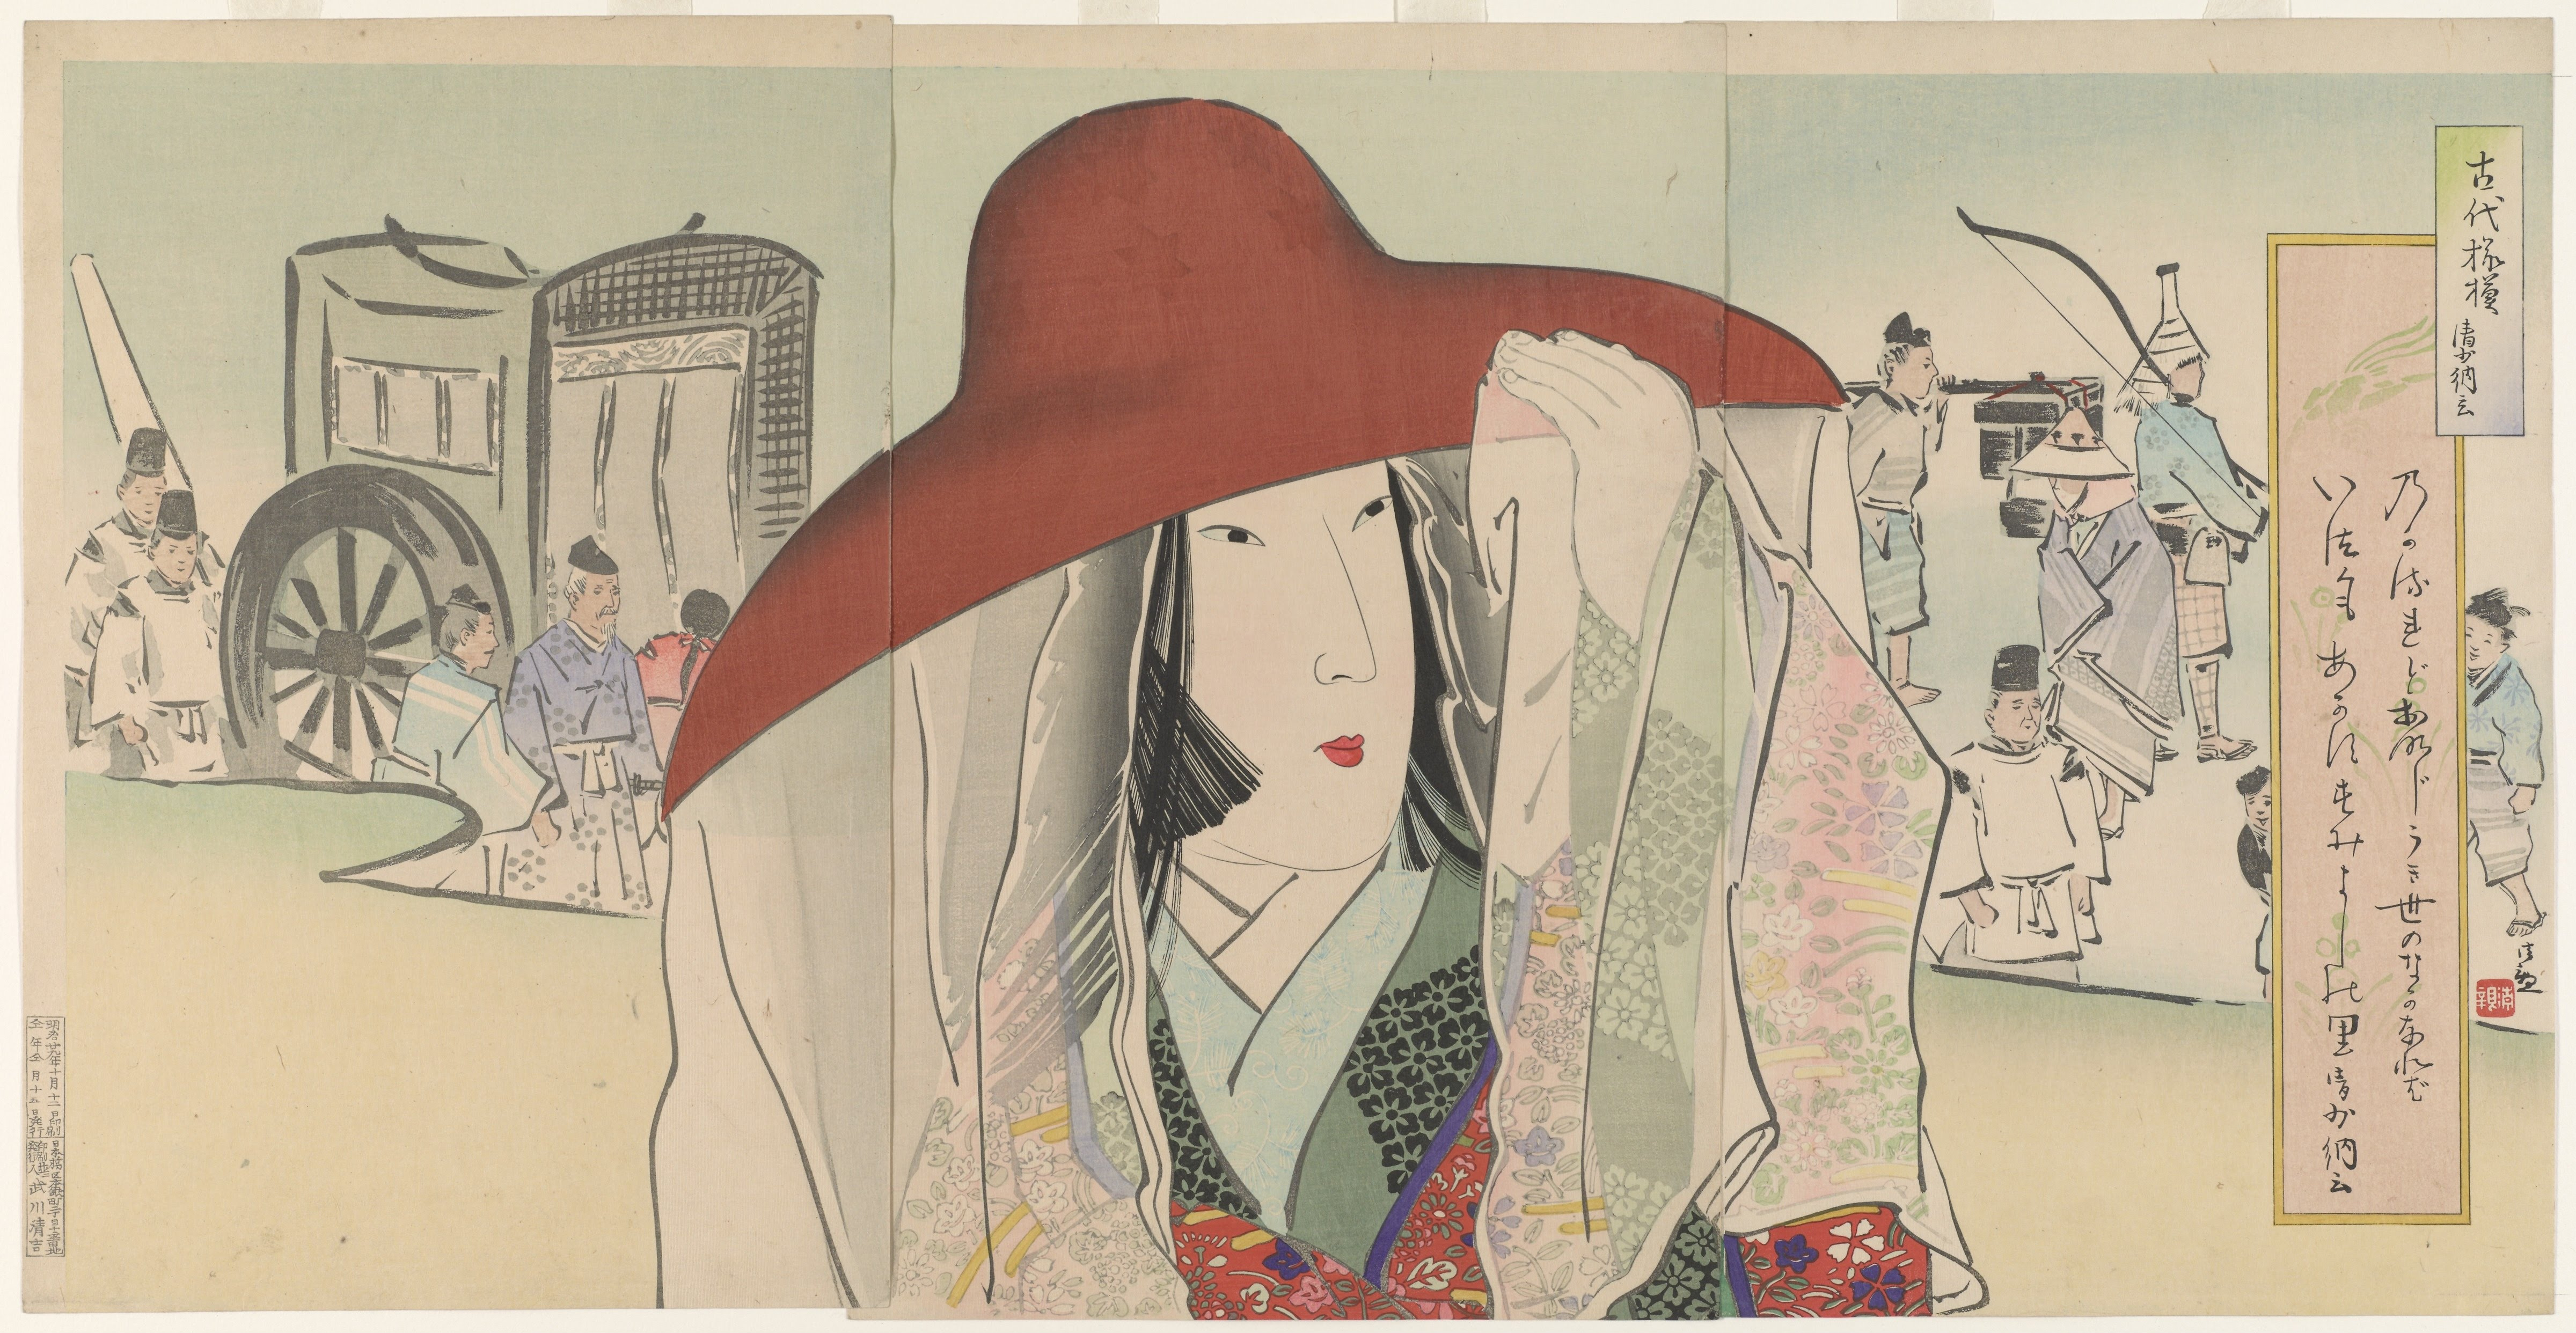 A woodblock portrait of the author Sei Shonagona wearing a red hat.